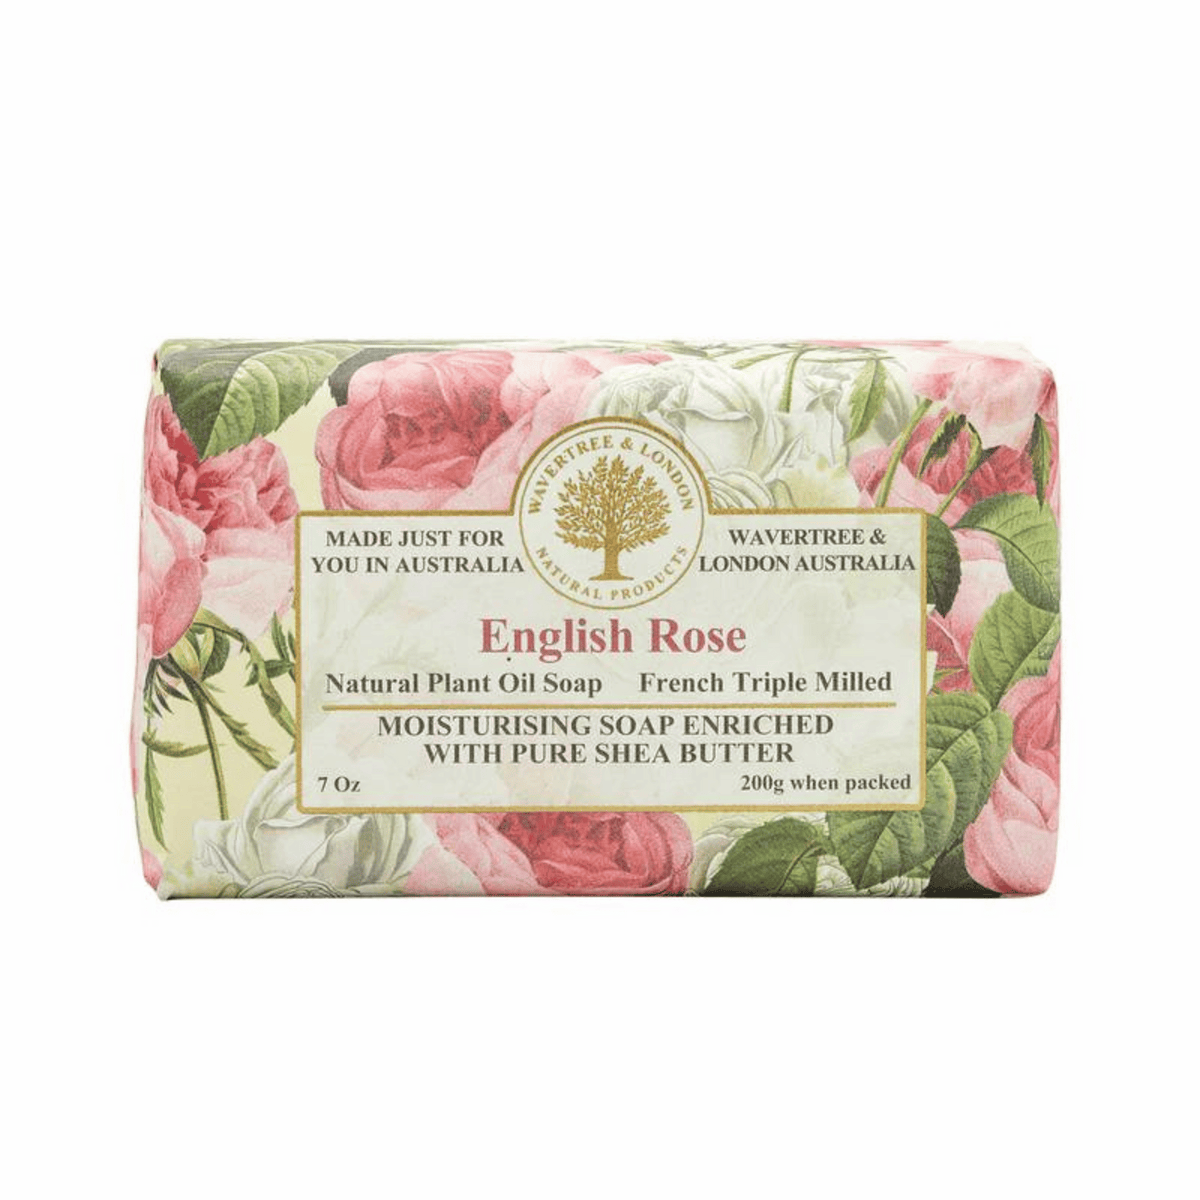 Primary Image of English Rose Soap Bar